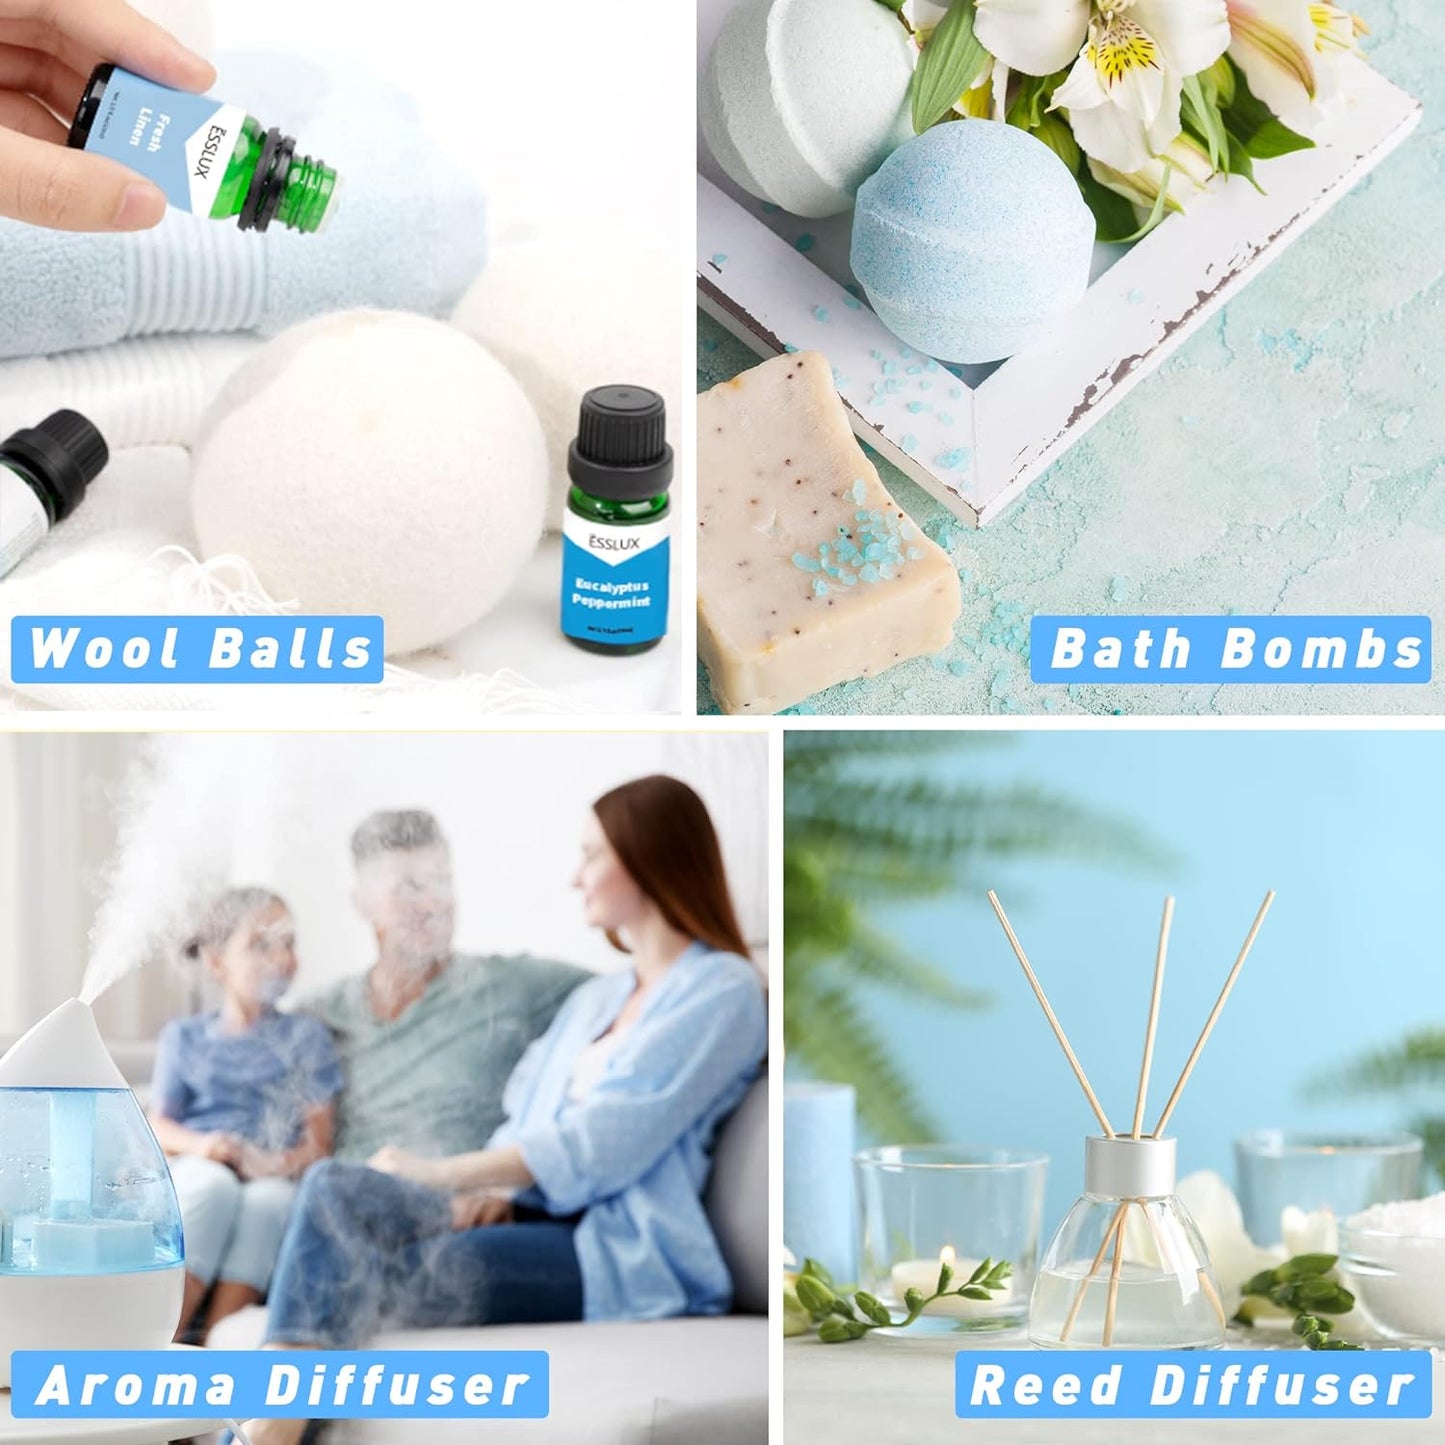 Fragrance Oil,  Clean Set of Scented Oils, Essential Oils for Diffuser for Home, Premium Soap & Candle Making Scents, Aromatherapy Oils Gift Set - Clean Air, Fresh Linen, Warm Cotton and More